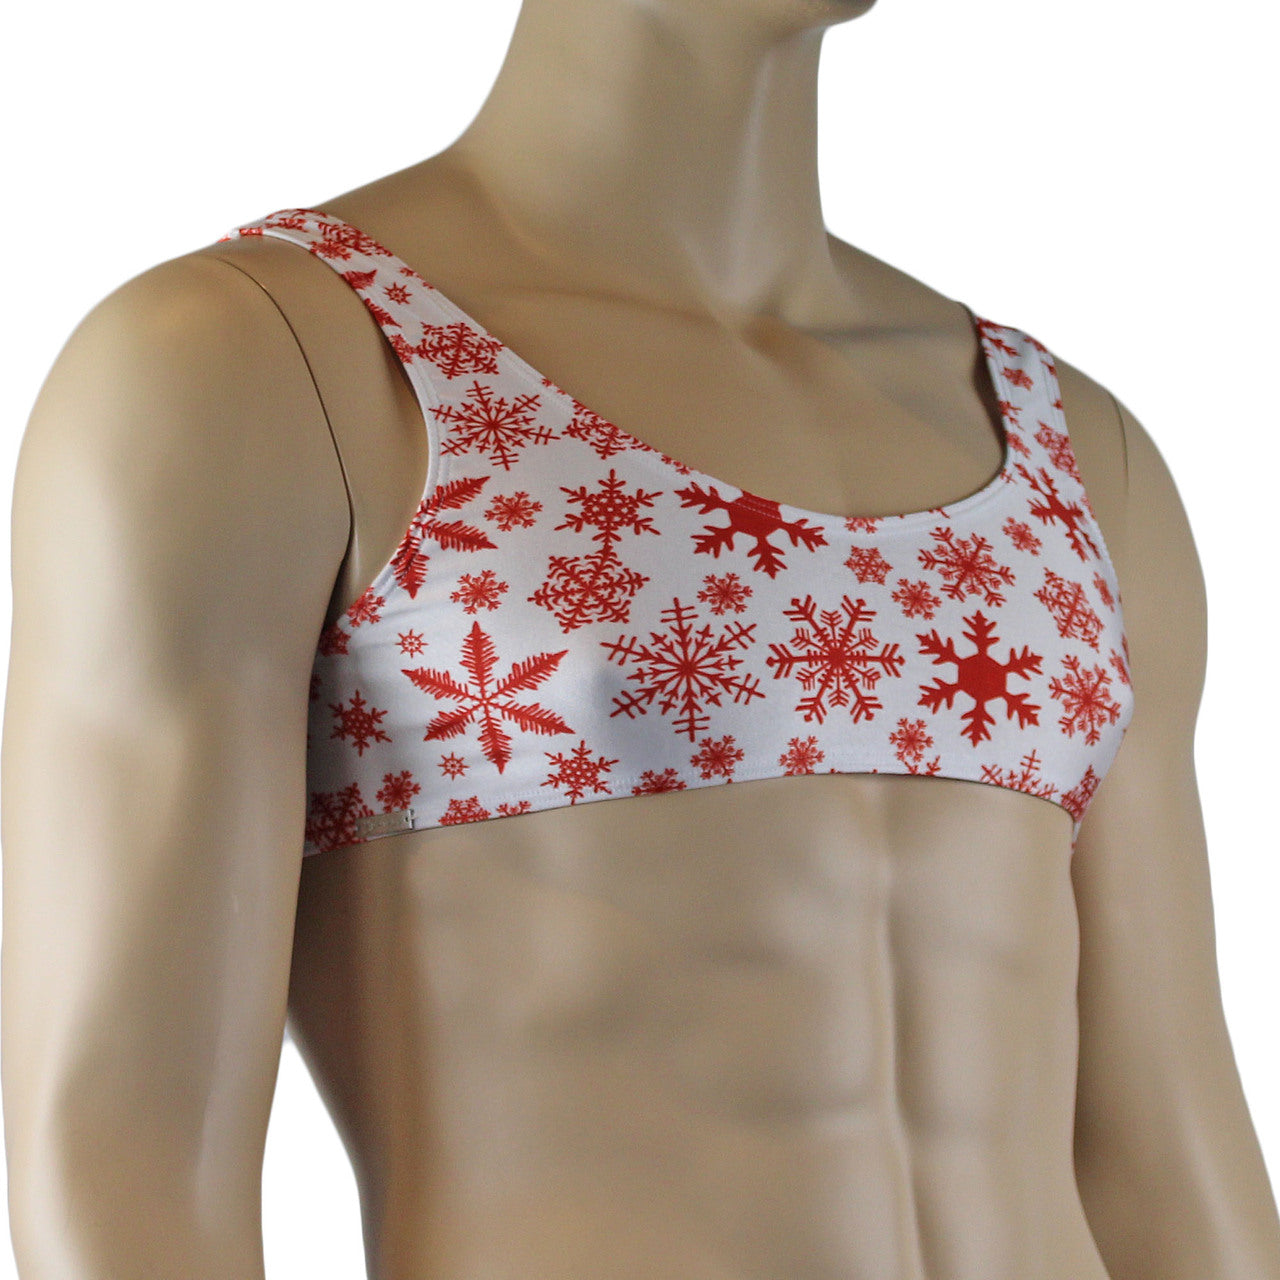 Mens Lingerie Snowflake Print Spandex Bra Top White and Red